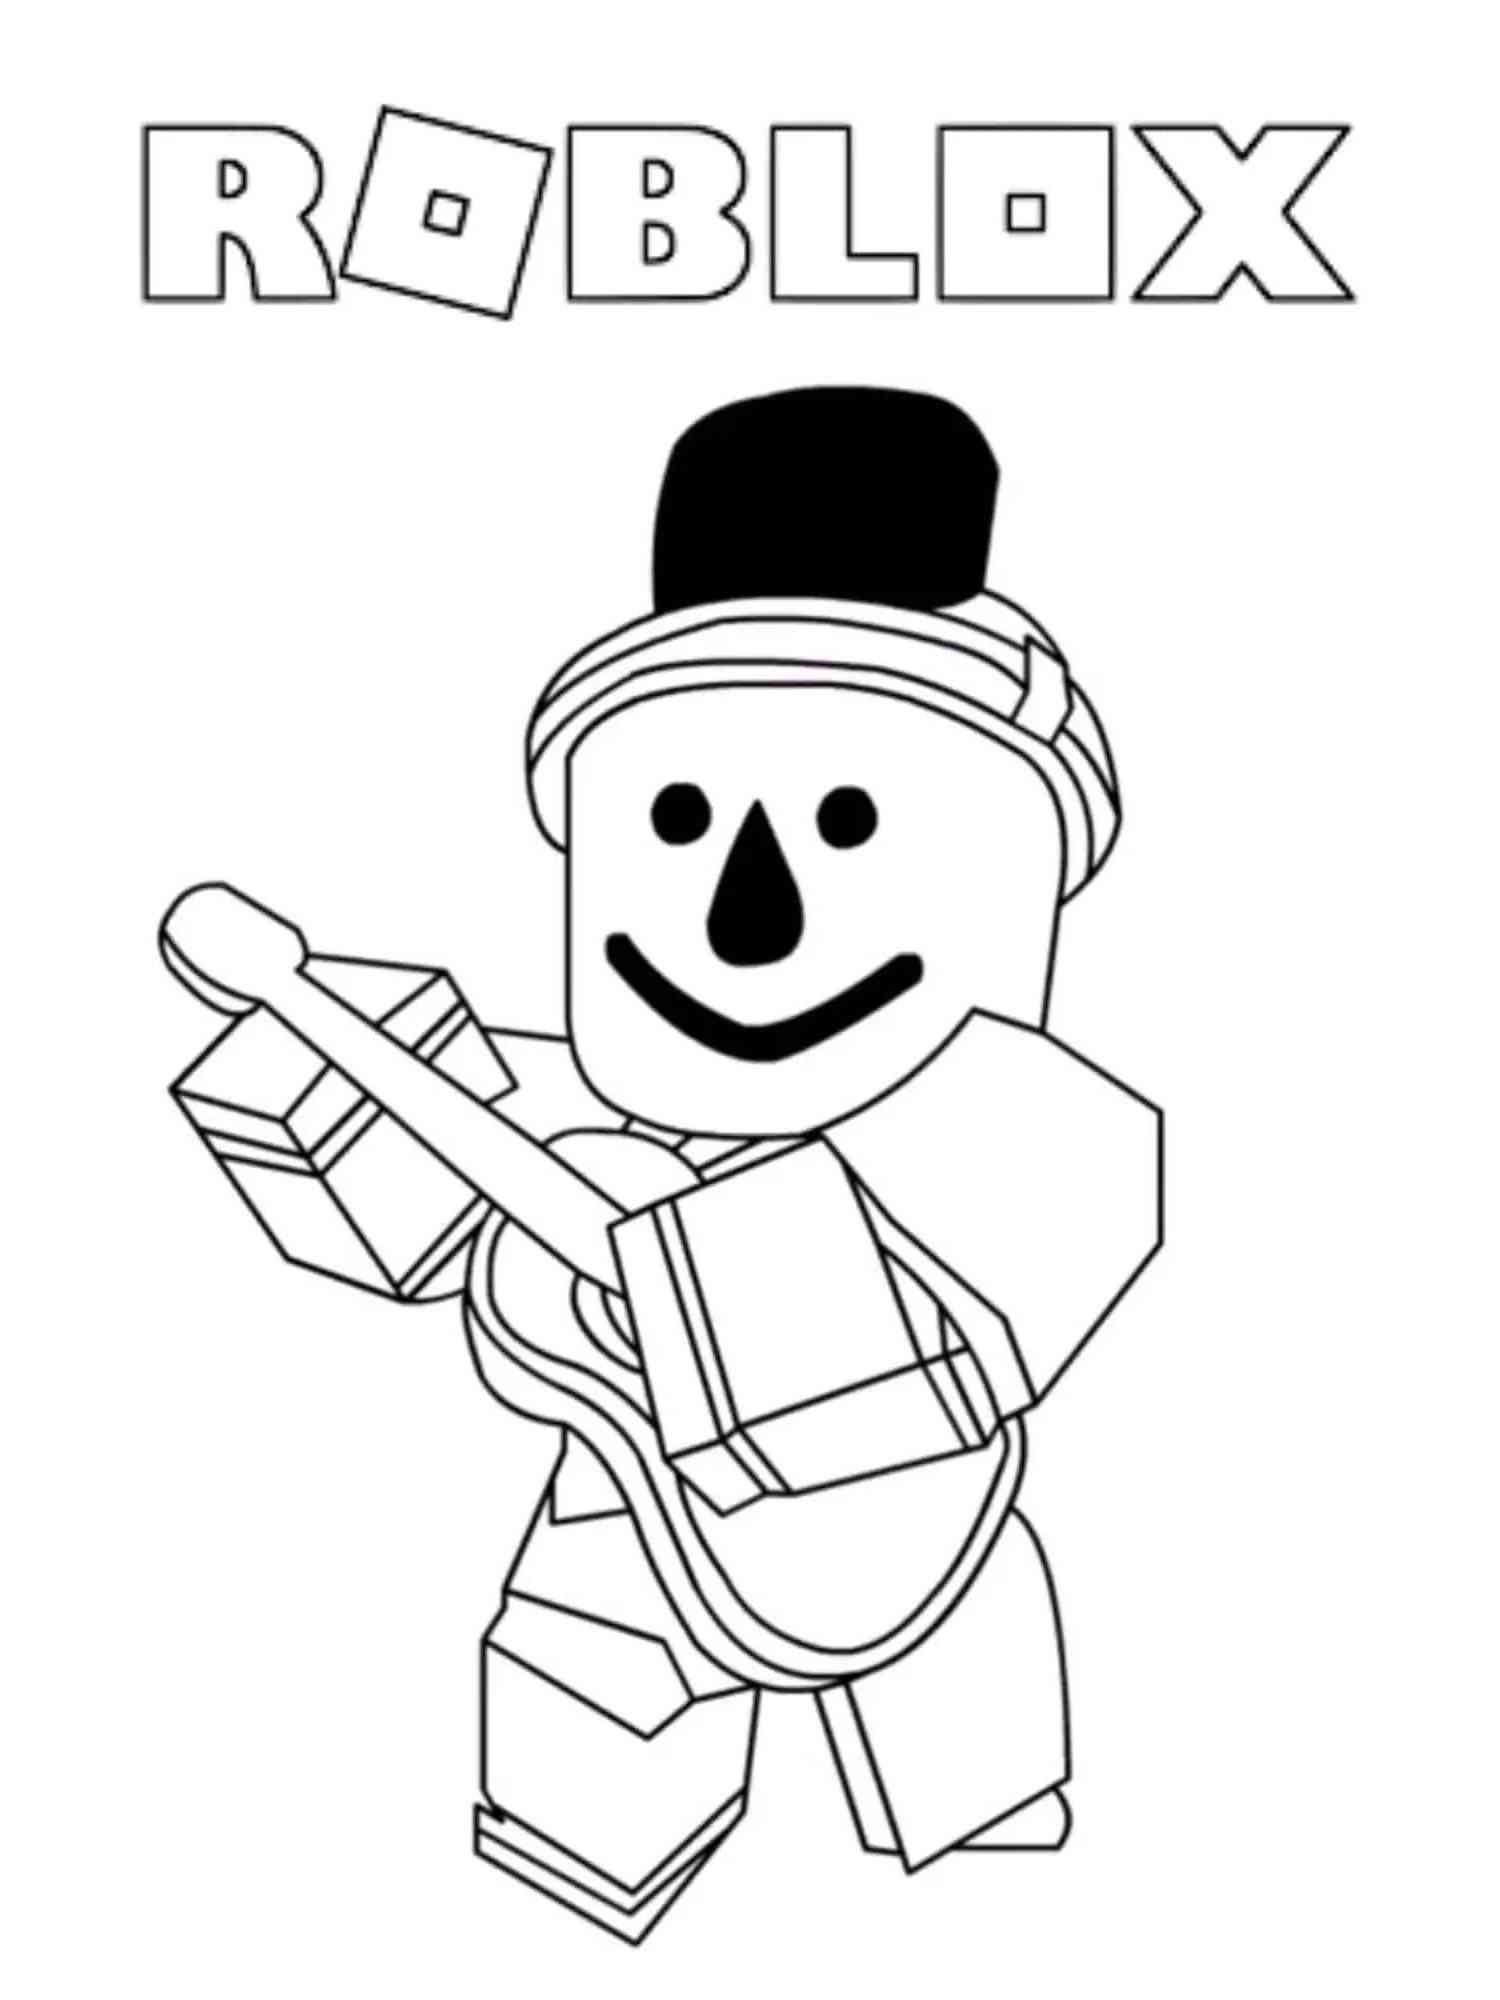 Funny Roblox coloring page